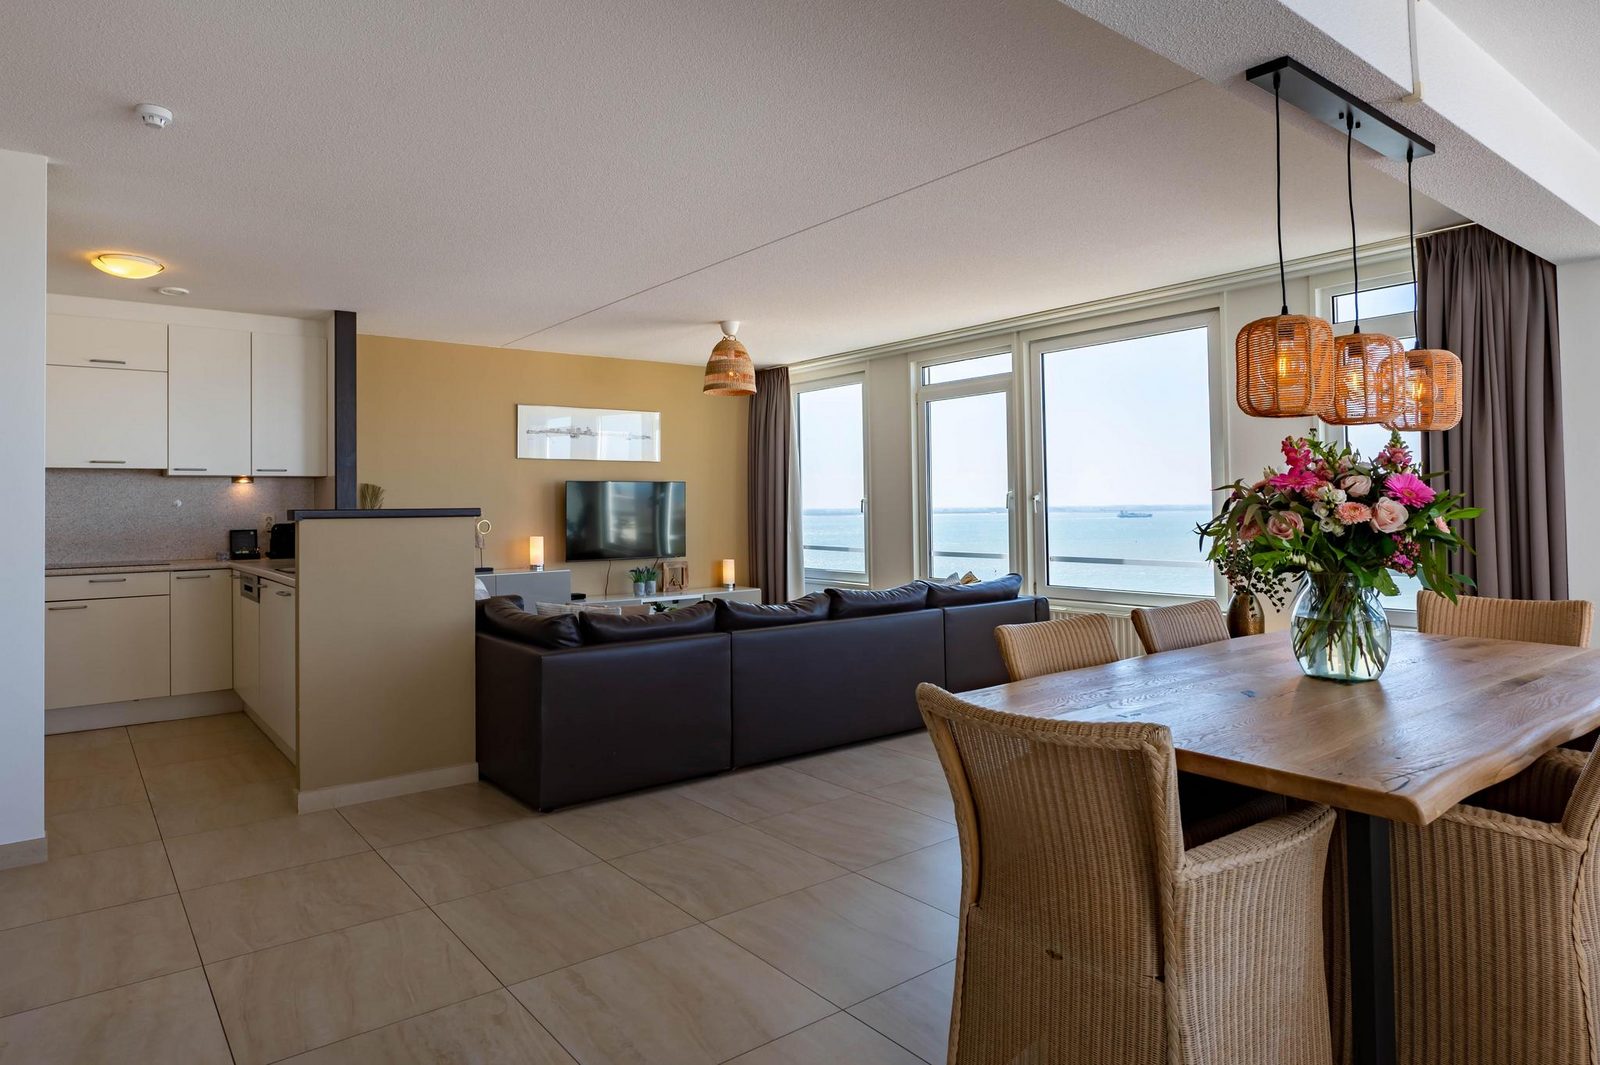 Penthouse 750 with ocean view